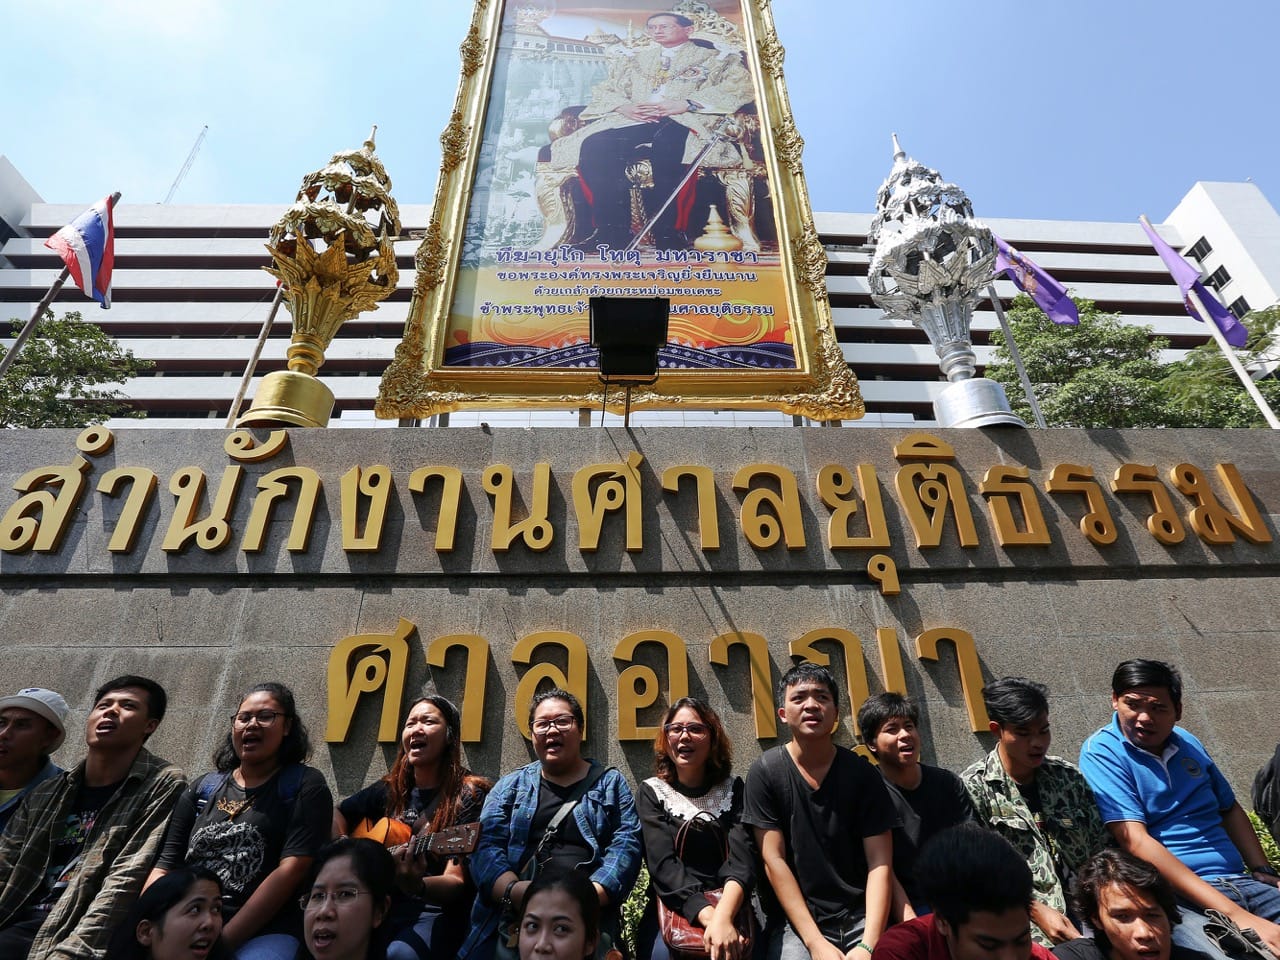 Supporters and friends of Patiwat Saraiyaem and Pornthip Munkong sing a song under a picture of Thailand's King, after the students were sentenced on charges of lese majeste, 23 February 2015, REUTERS/Damir Sagolj